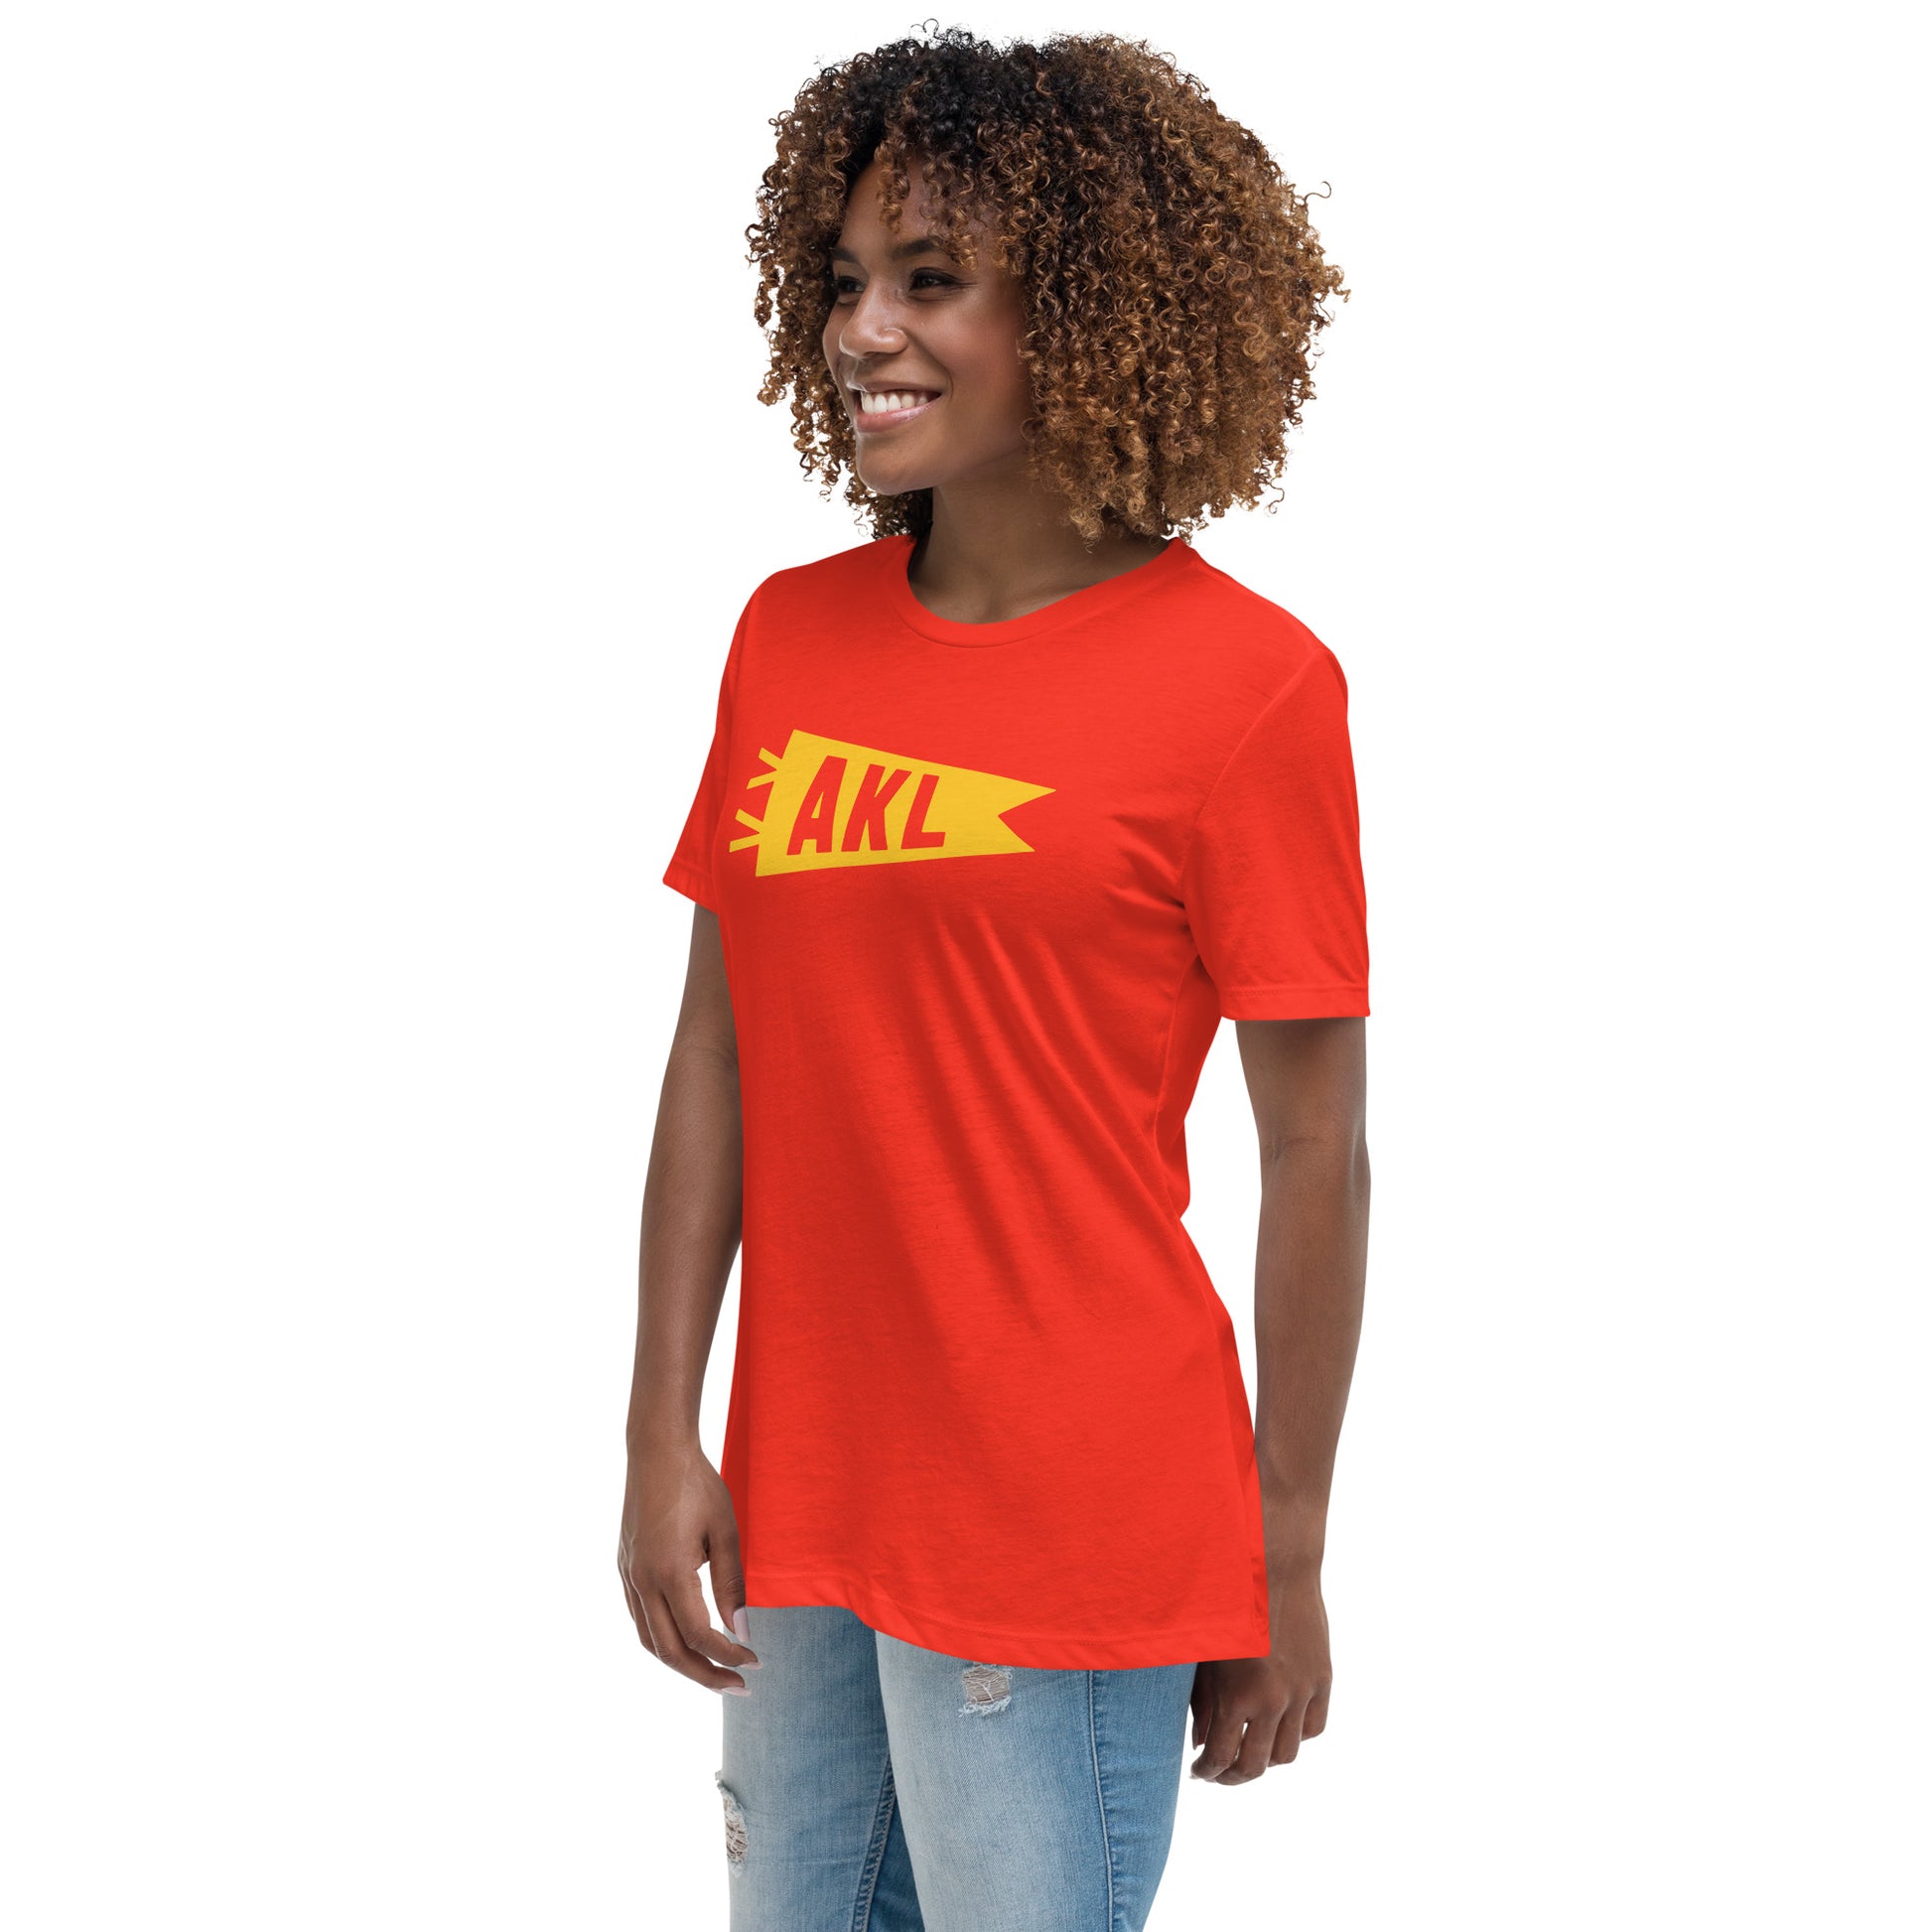 Airport Code Women's Tee - Yellow Graphic • AKL Auckland • YHM Designs - Image 04